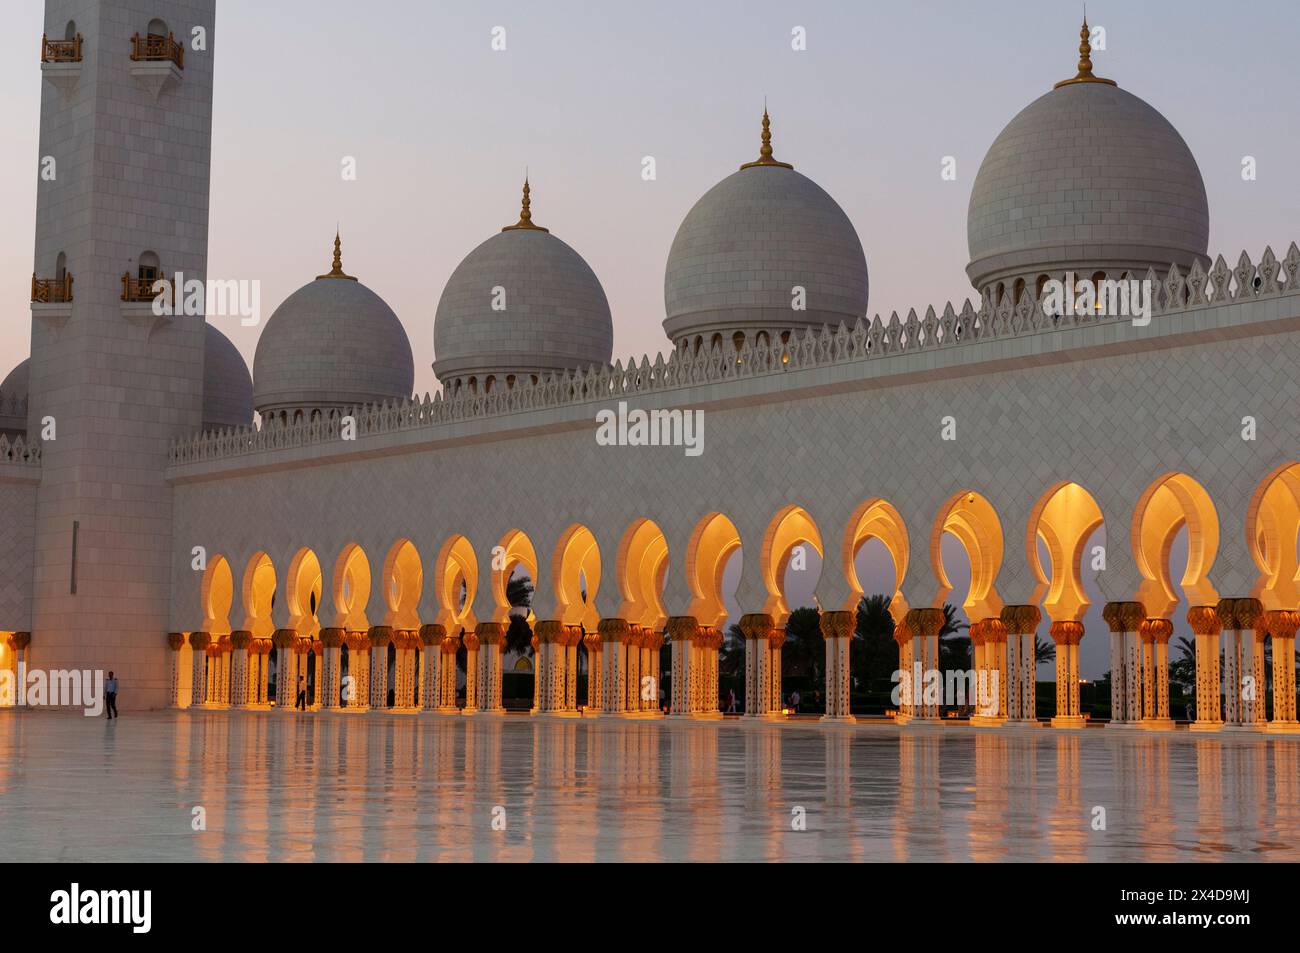 Domes and lighted archways at the Sheikh Zayed Grand Mosque at dusk. Abu Dhabi, United Arab Emirates. Stock Photo